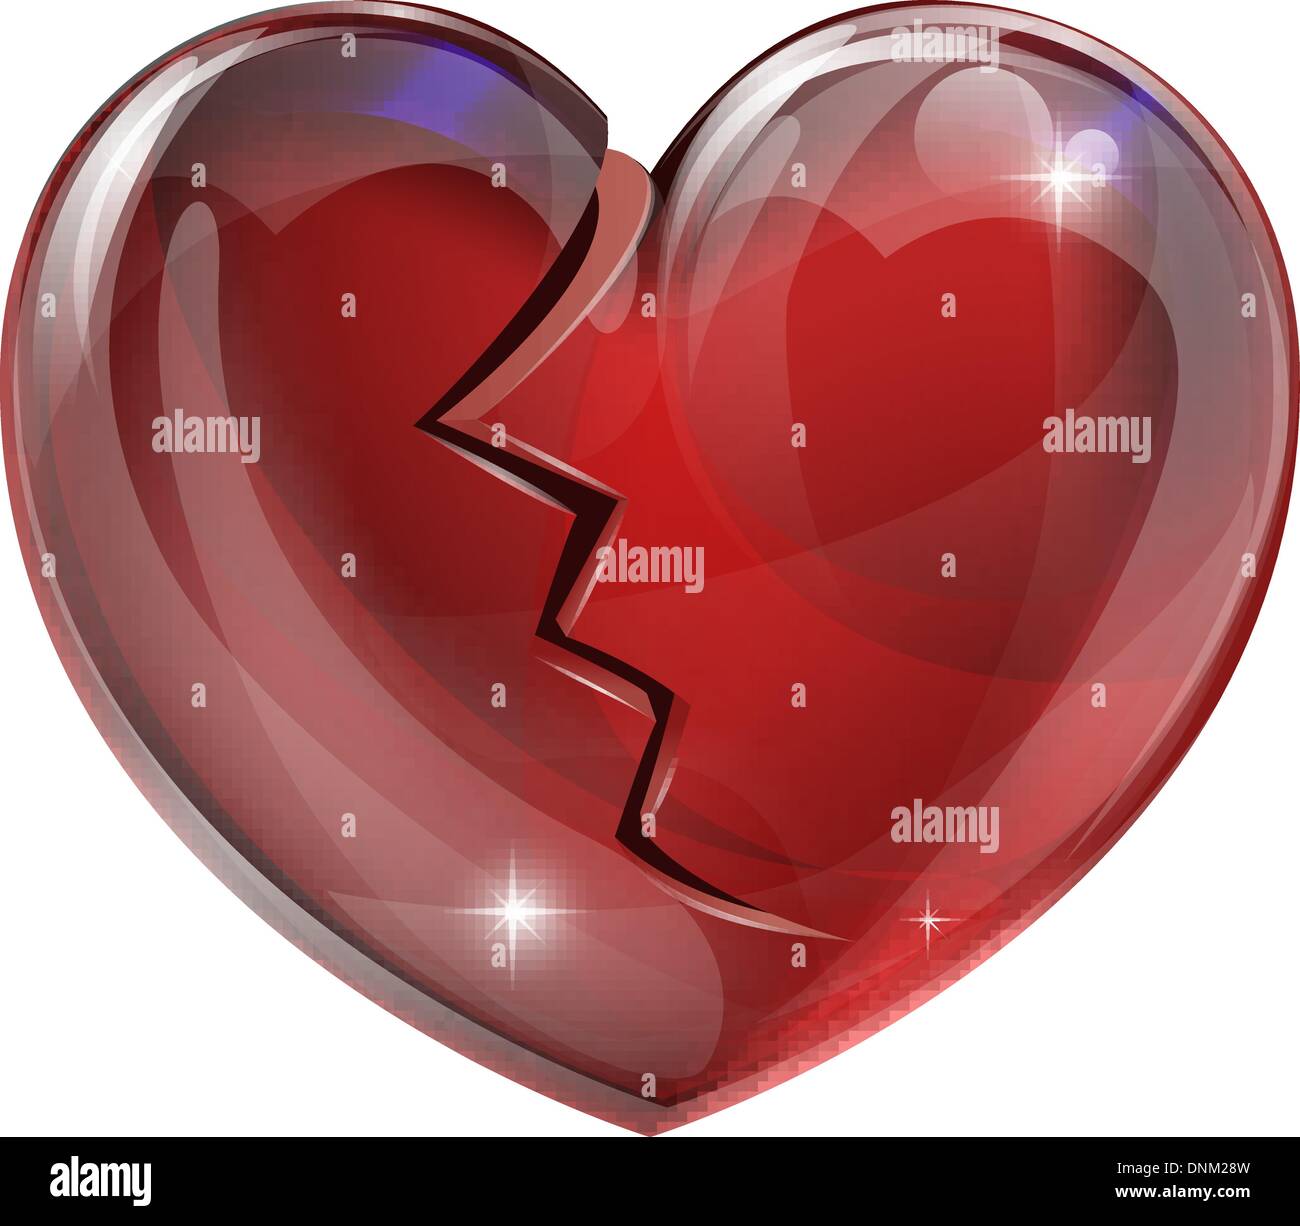 Illustration of a broken heart with a crack. Concept for heart disease or problems, being heartbroken, bereaved or unlucky in lo Stock Vector